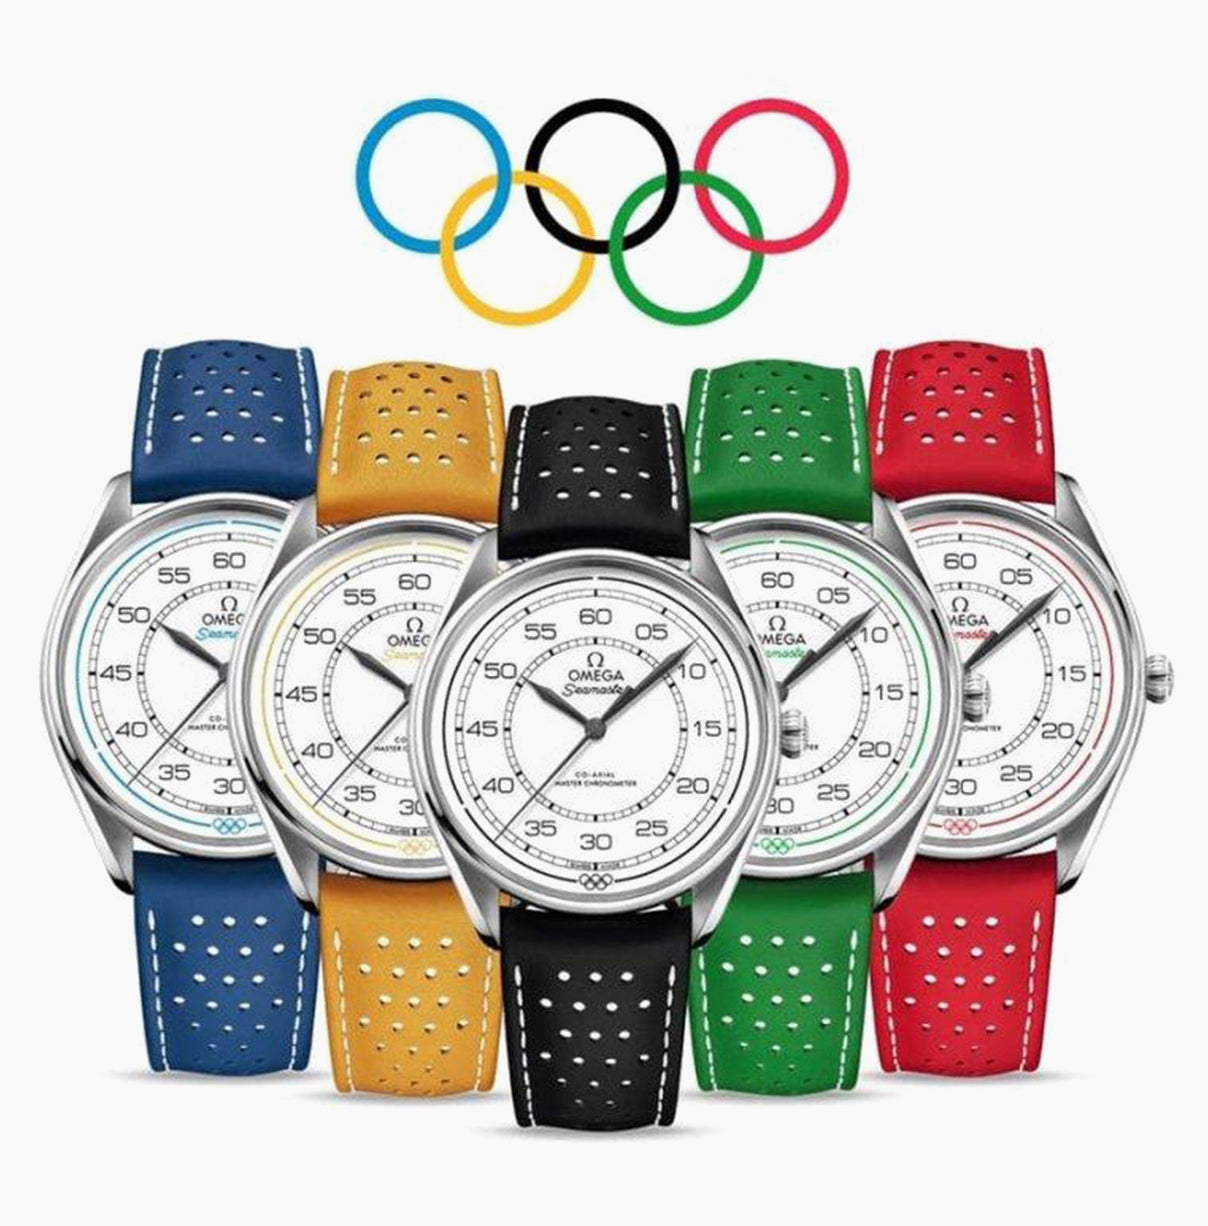 Omega Olympic FULL SET Limited Edition Watch 39.5mm | Harley's Time LLC